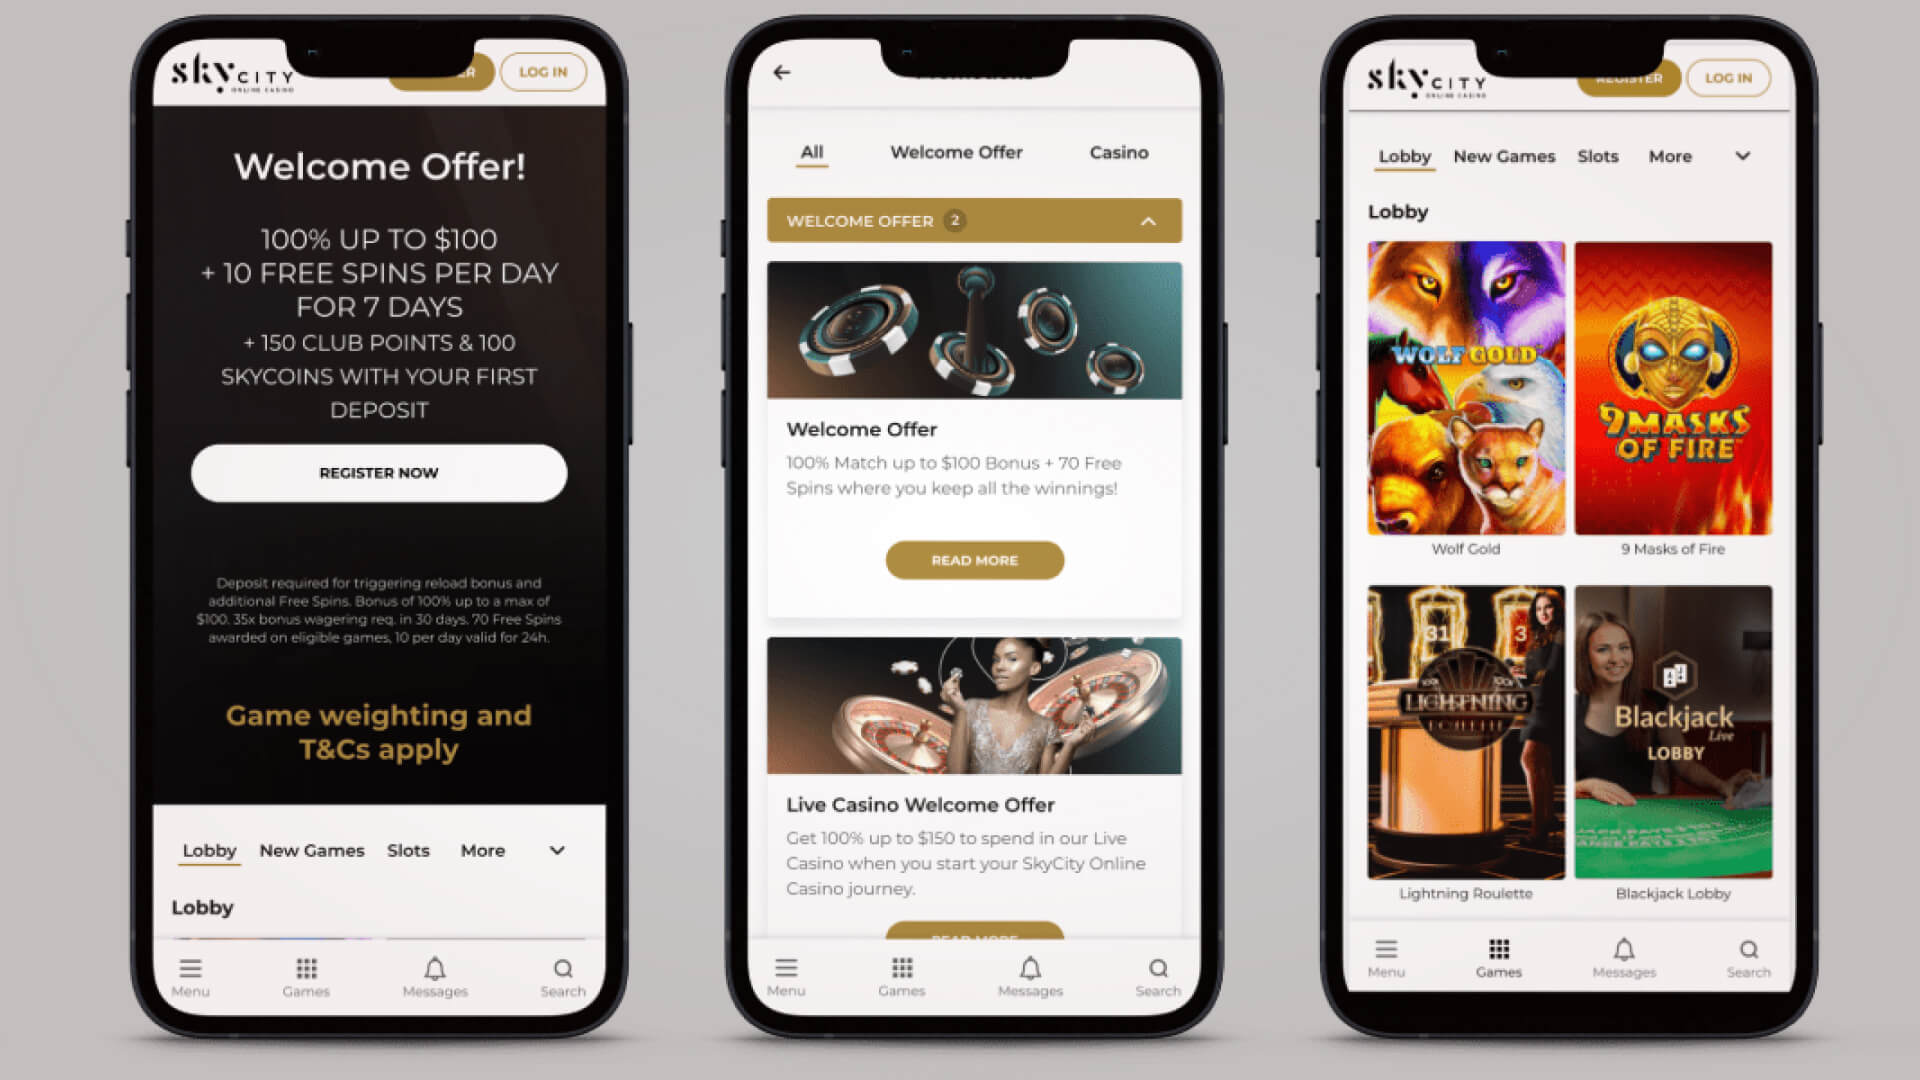 SkyCity Casino for mobile devices